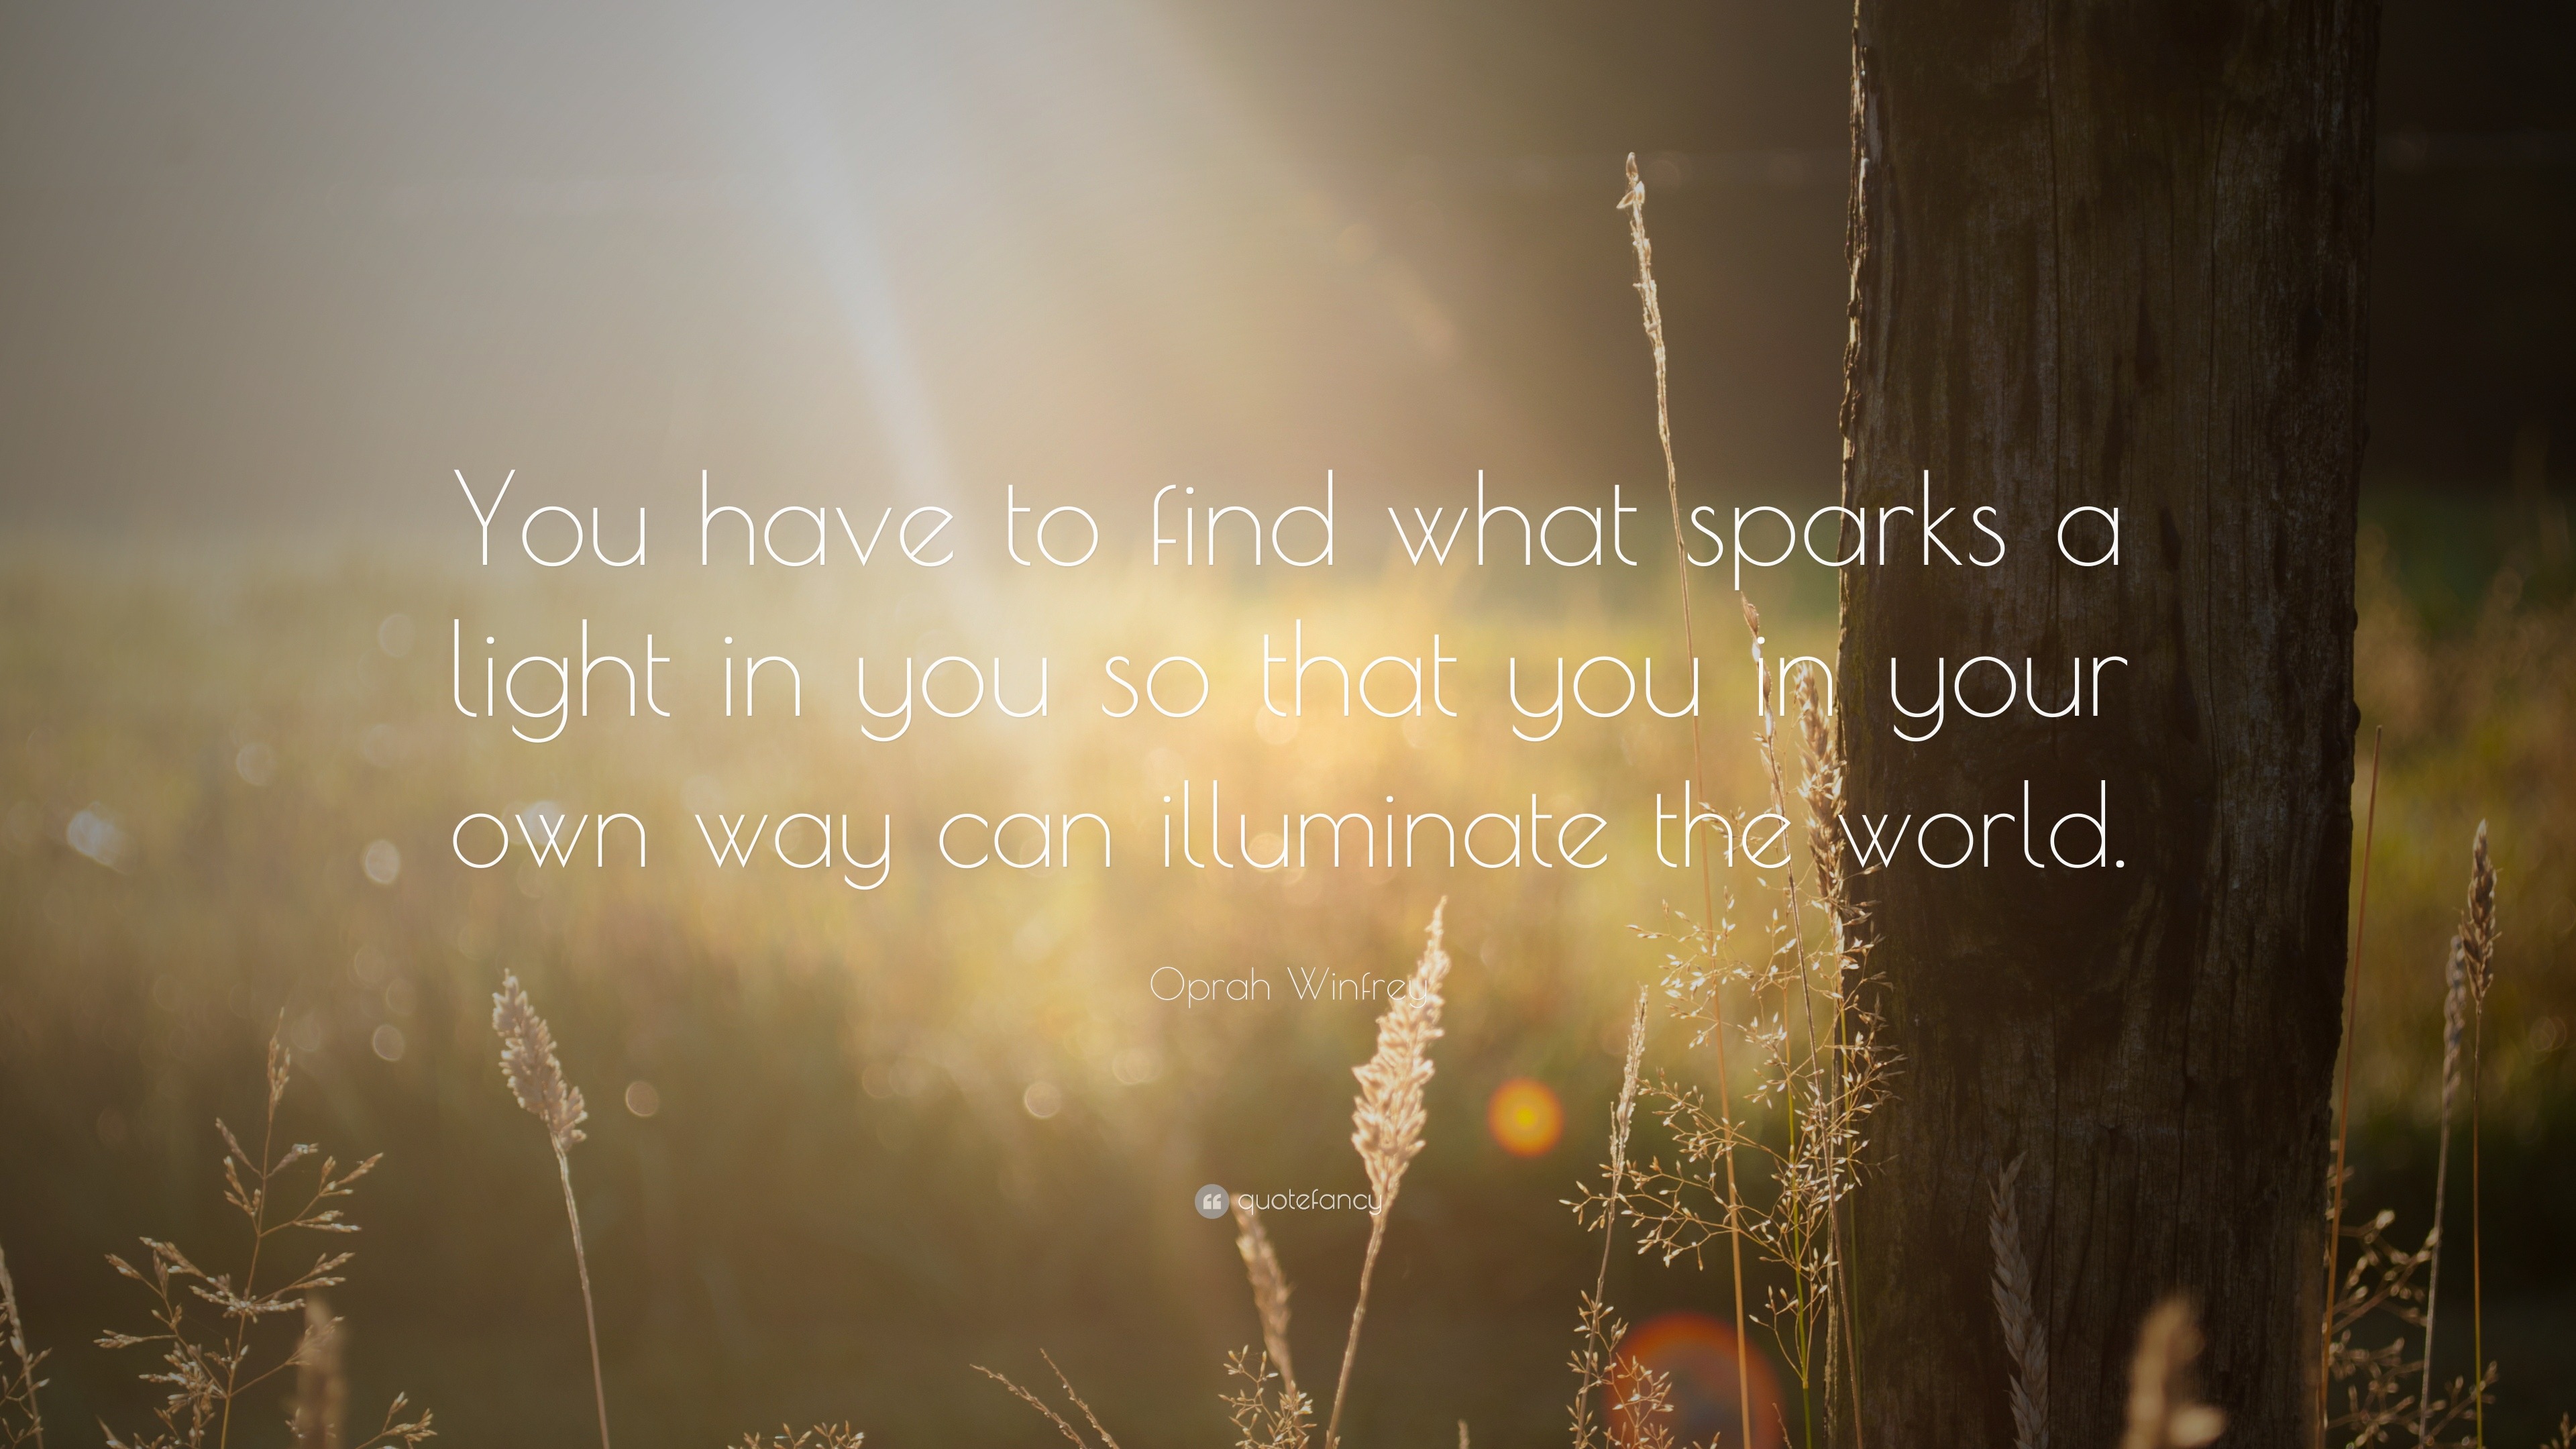 Oprah Winfrey Quote You Have To Find What Sparks A Light In You So That You In Your Own Way Can Illuminate The World 15 Wallpapers Quotefancy